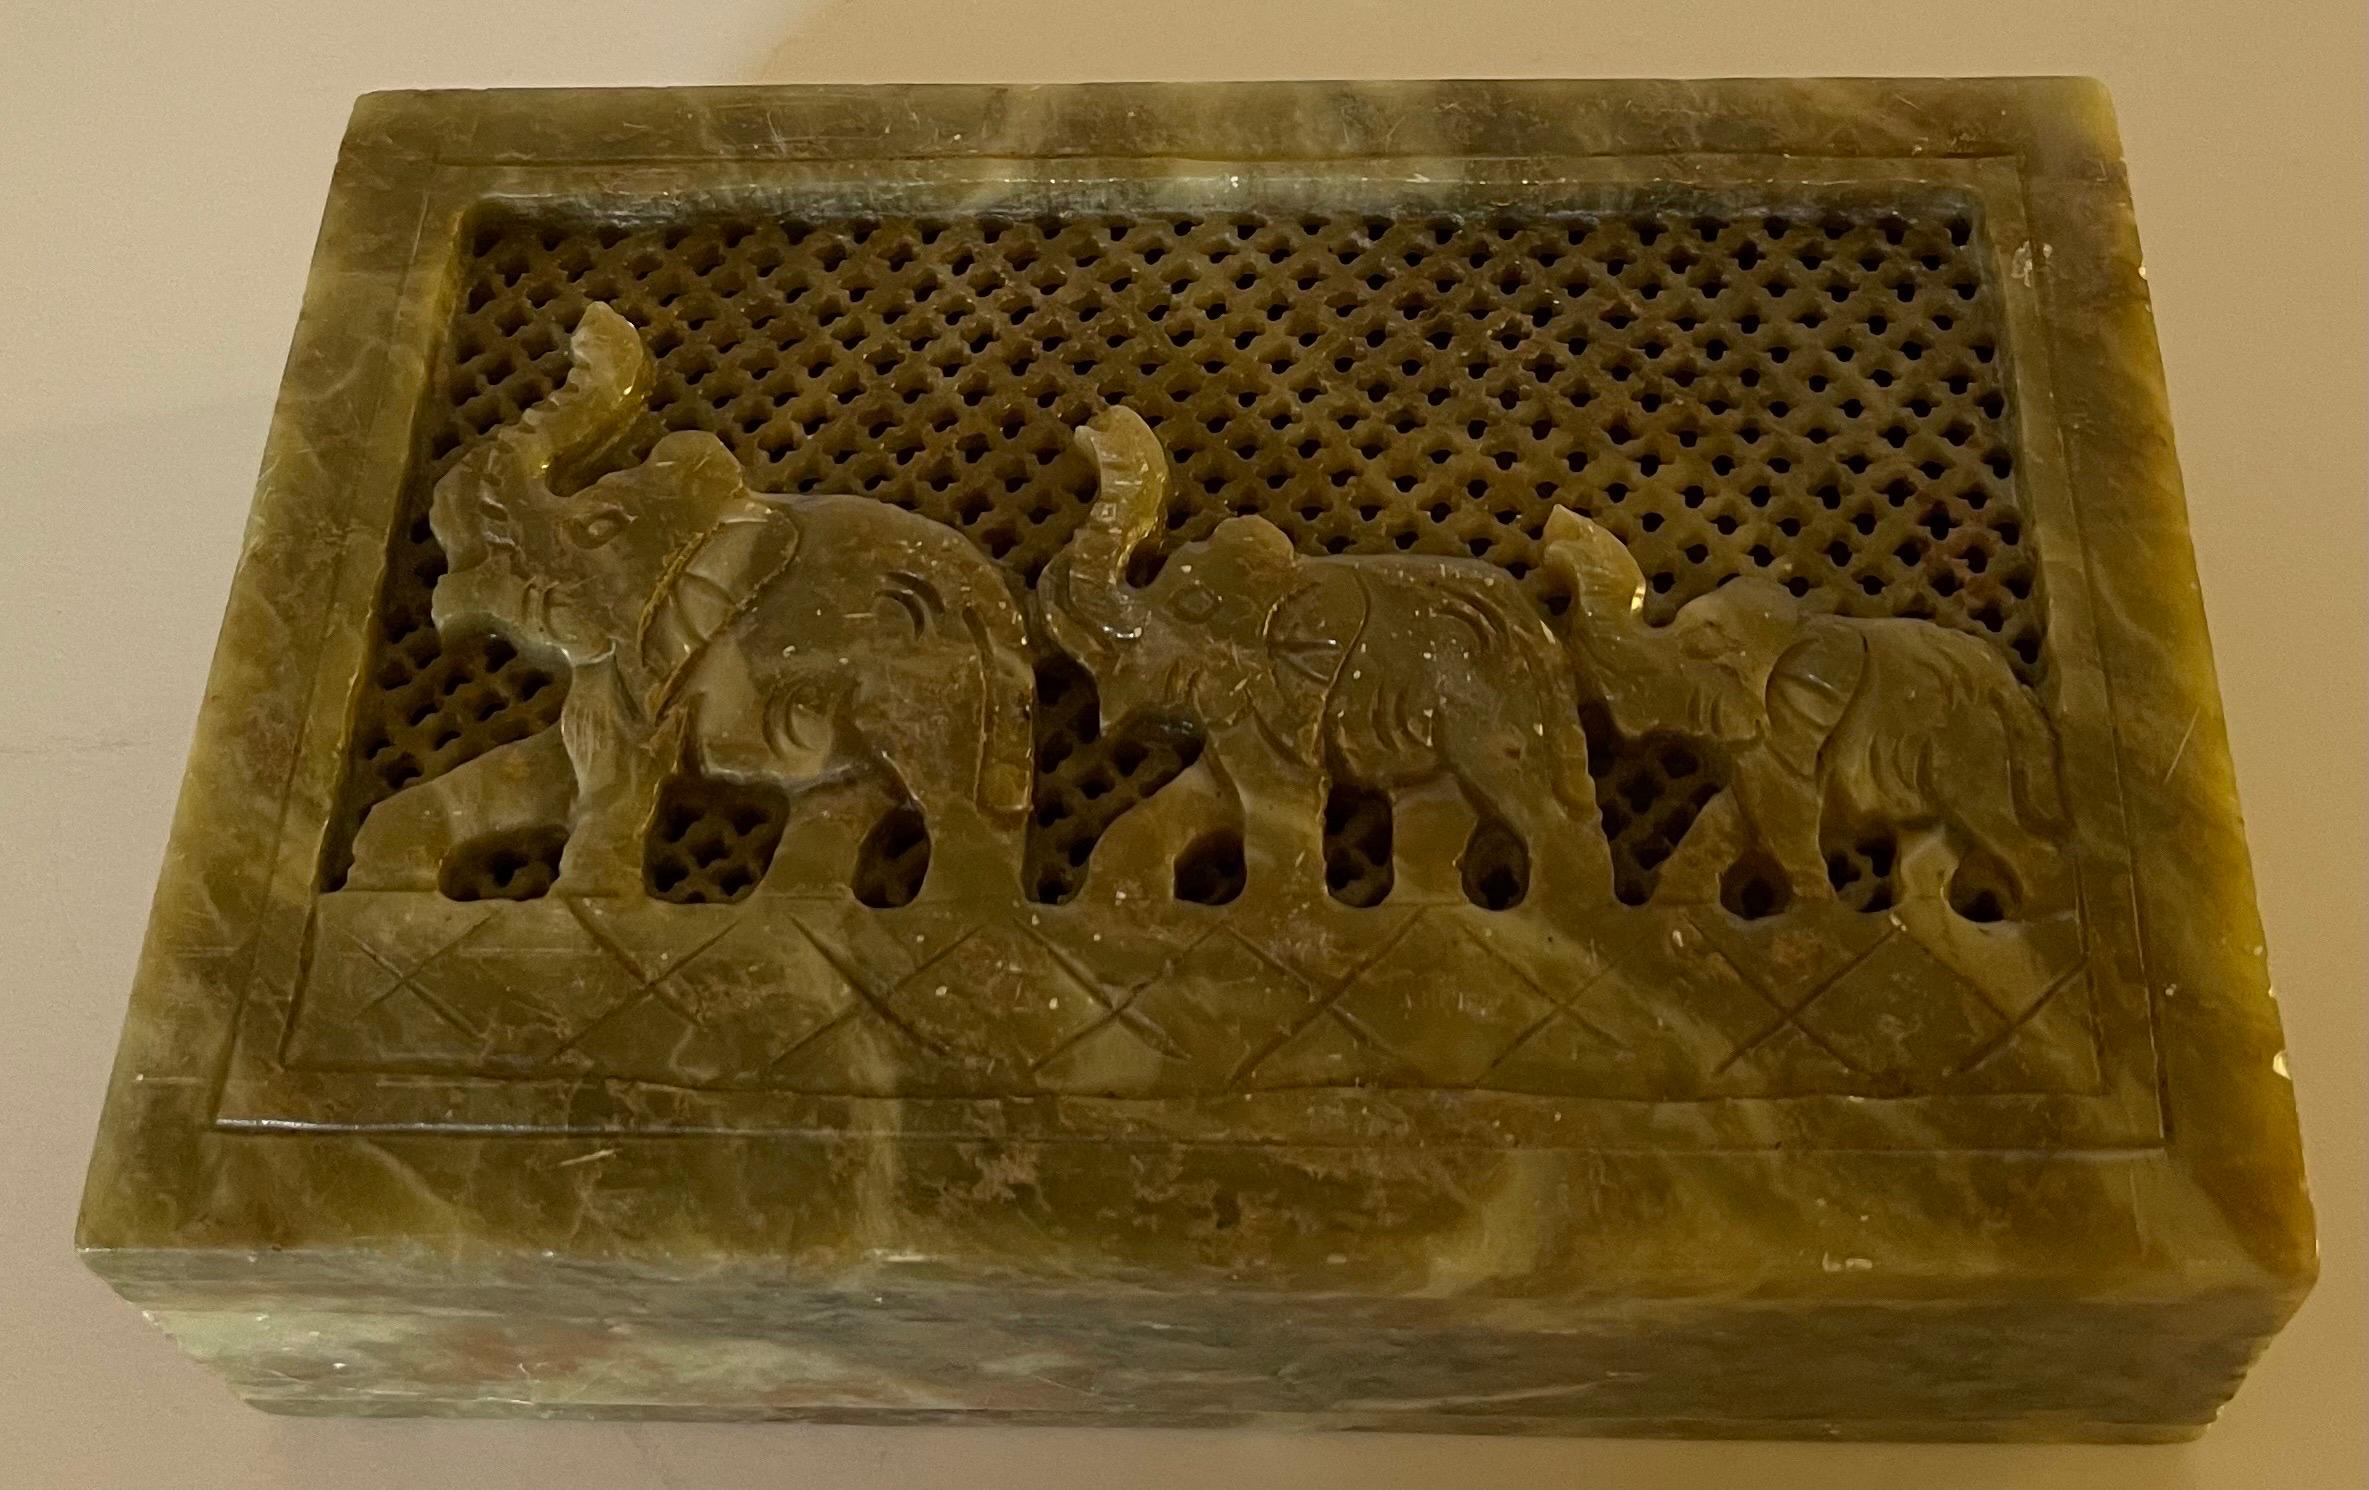 1980s green carved soapstone decorative box. Carved elephant motif across the lid of the box. No makers mark or signature. 